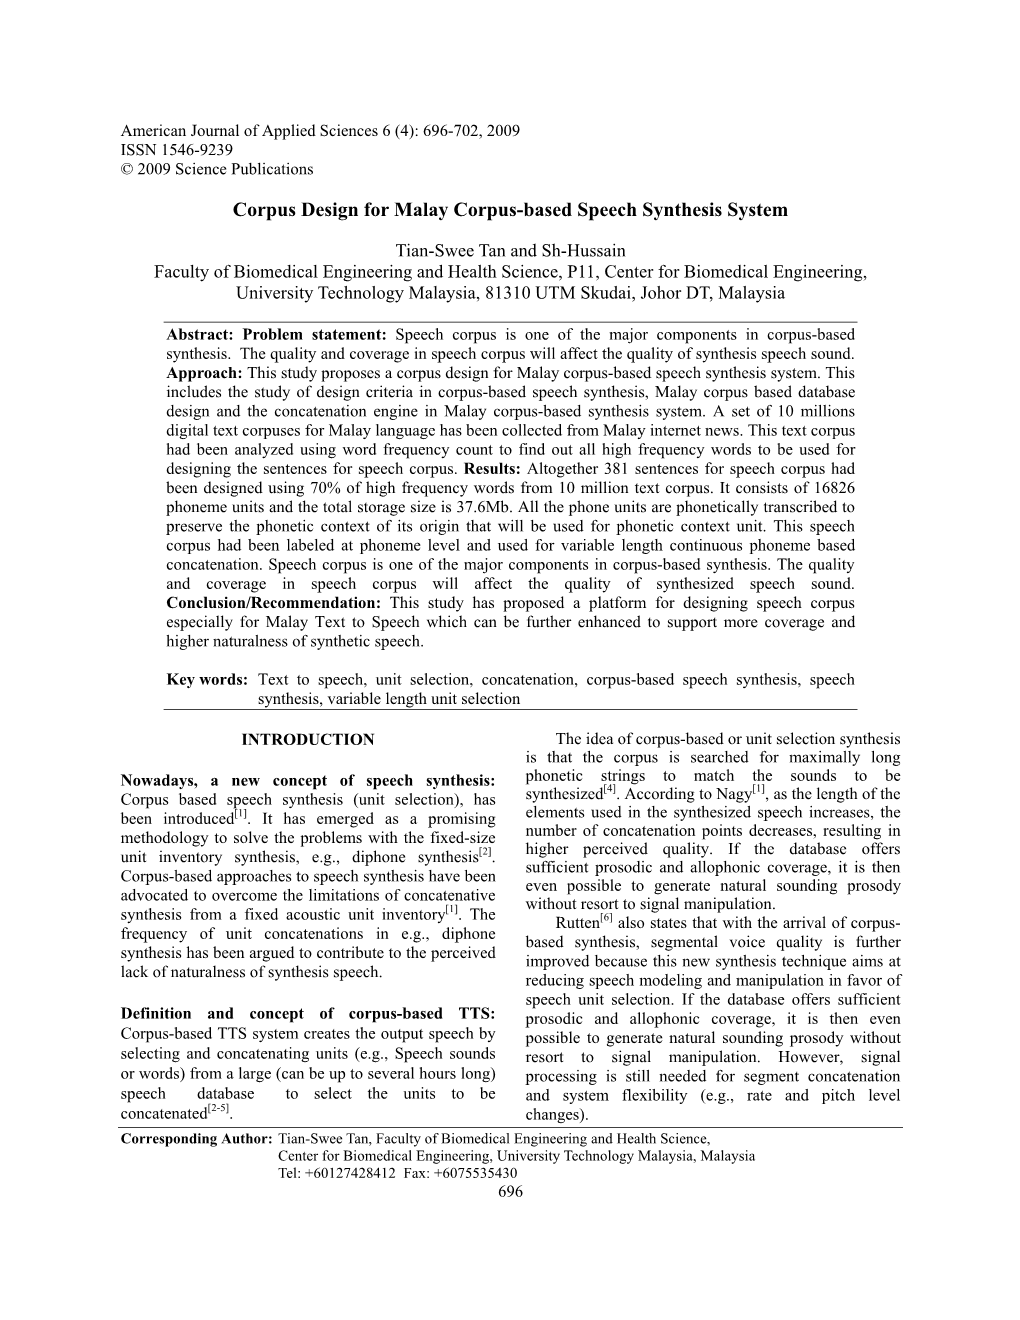 Corpus Design for Malay Corpus-Based Speech Synthesis System